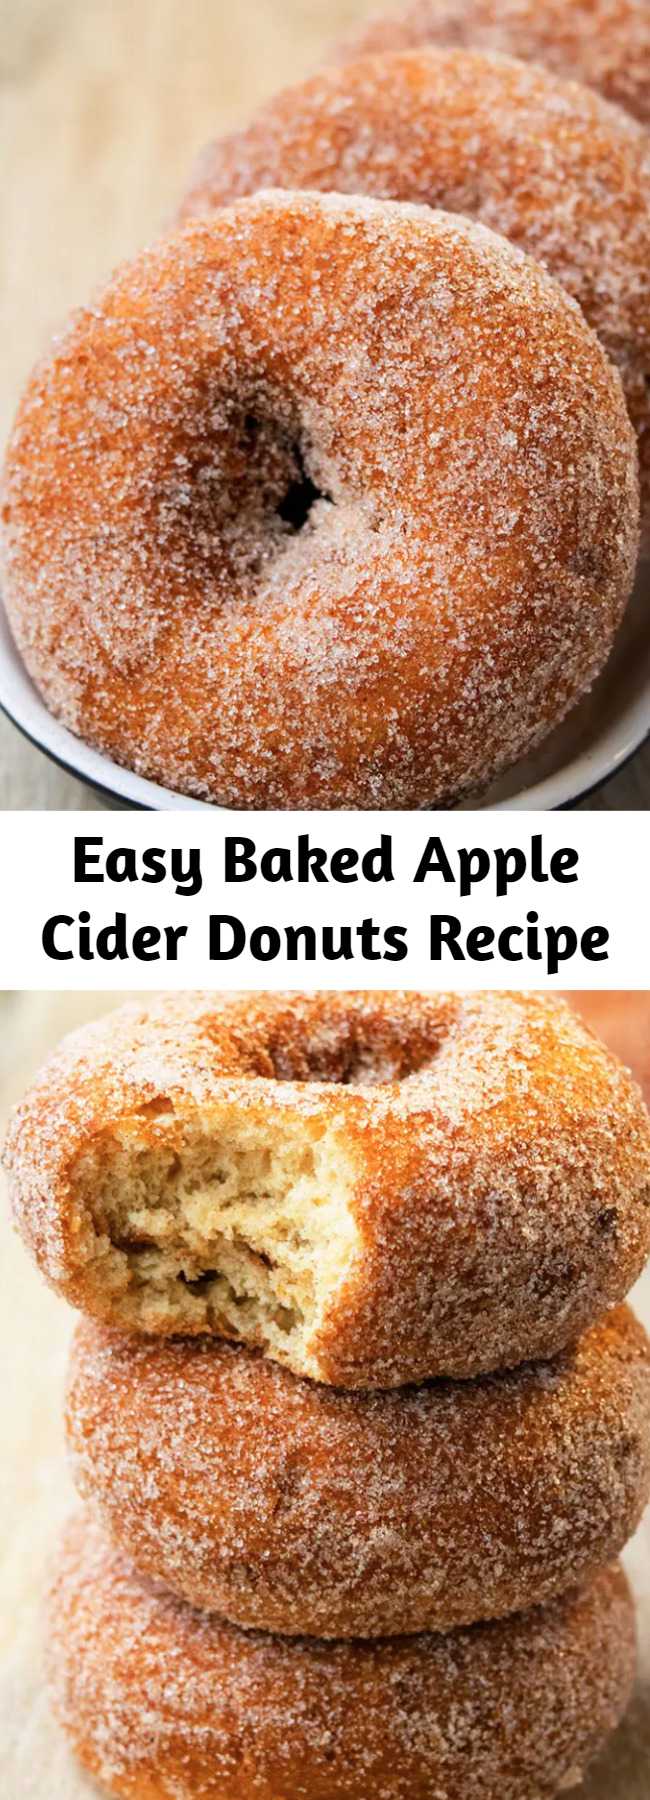 Easy Baked Apple Cider Donuts Recipe - Easy, old fashioned, baked donuts, homemade with simple ingredients in about 30 minutes. Coated in spiced cinnamon sugar. Soft, moist, tender and cake-like! Can also make donut holes. #donuts #apples #baking #breakfast #dessert #fall #thanksgiving